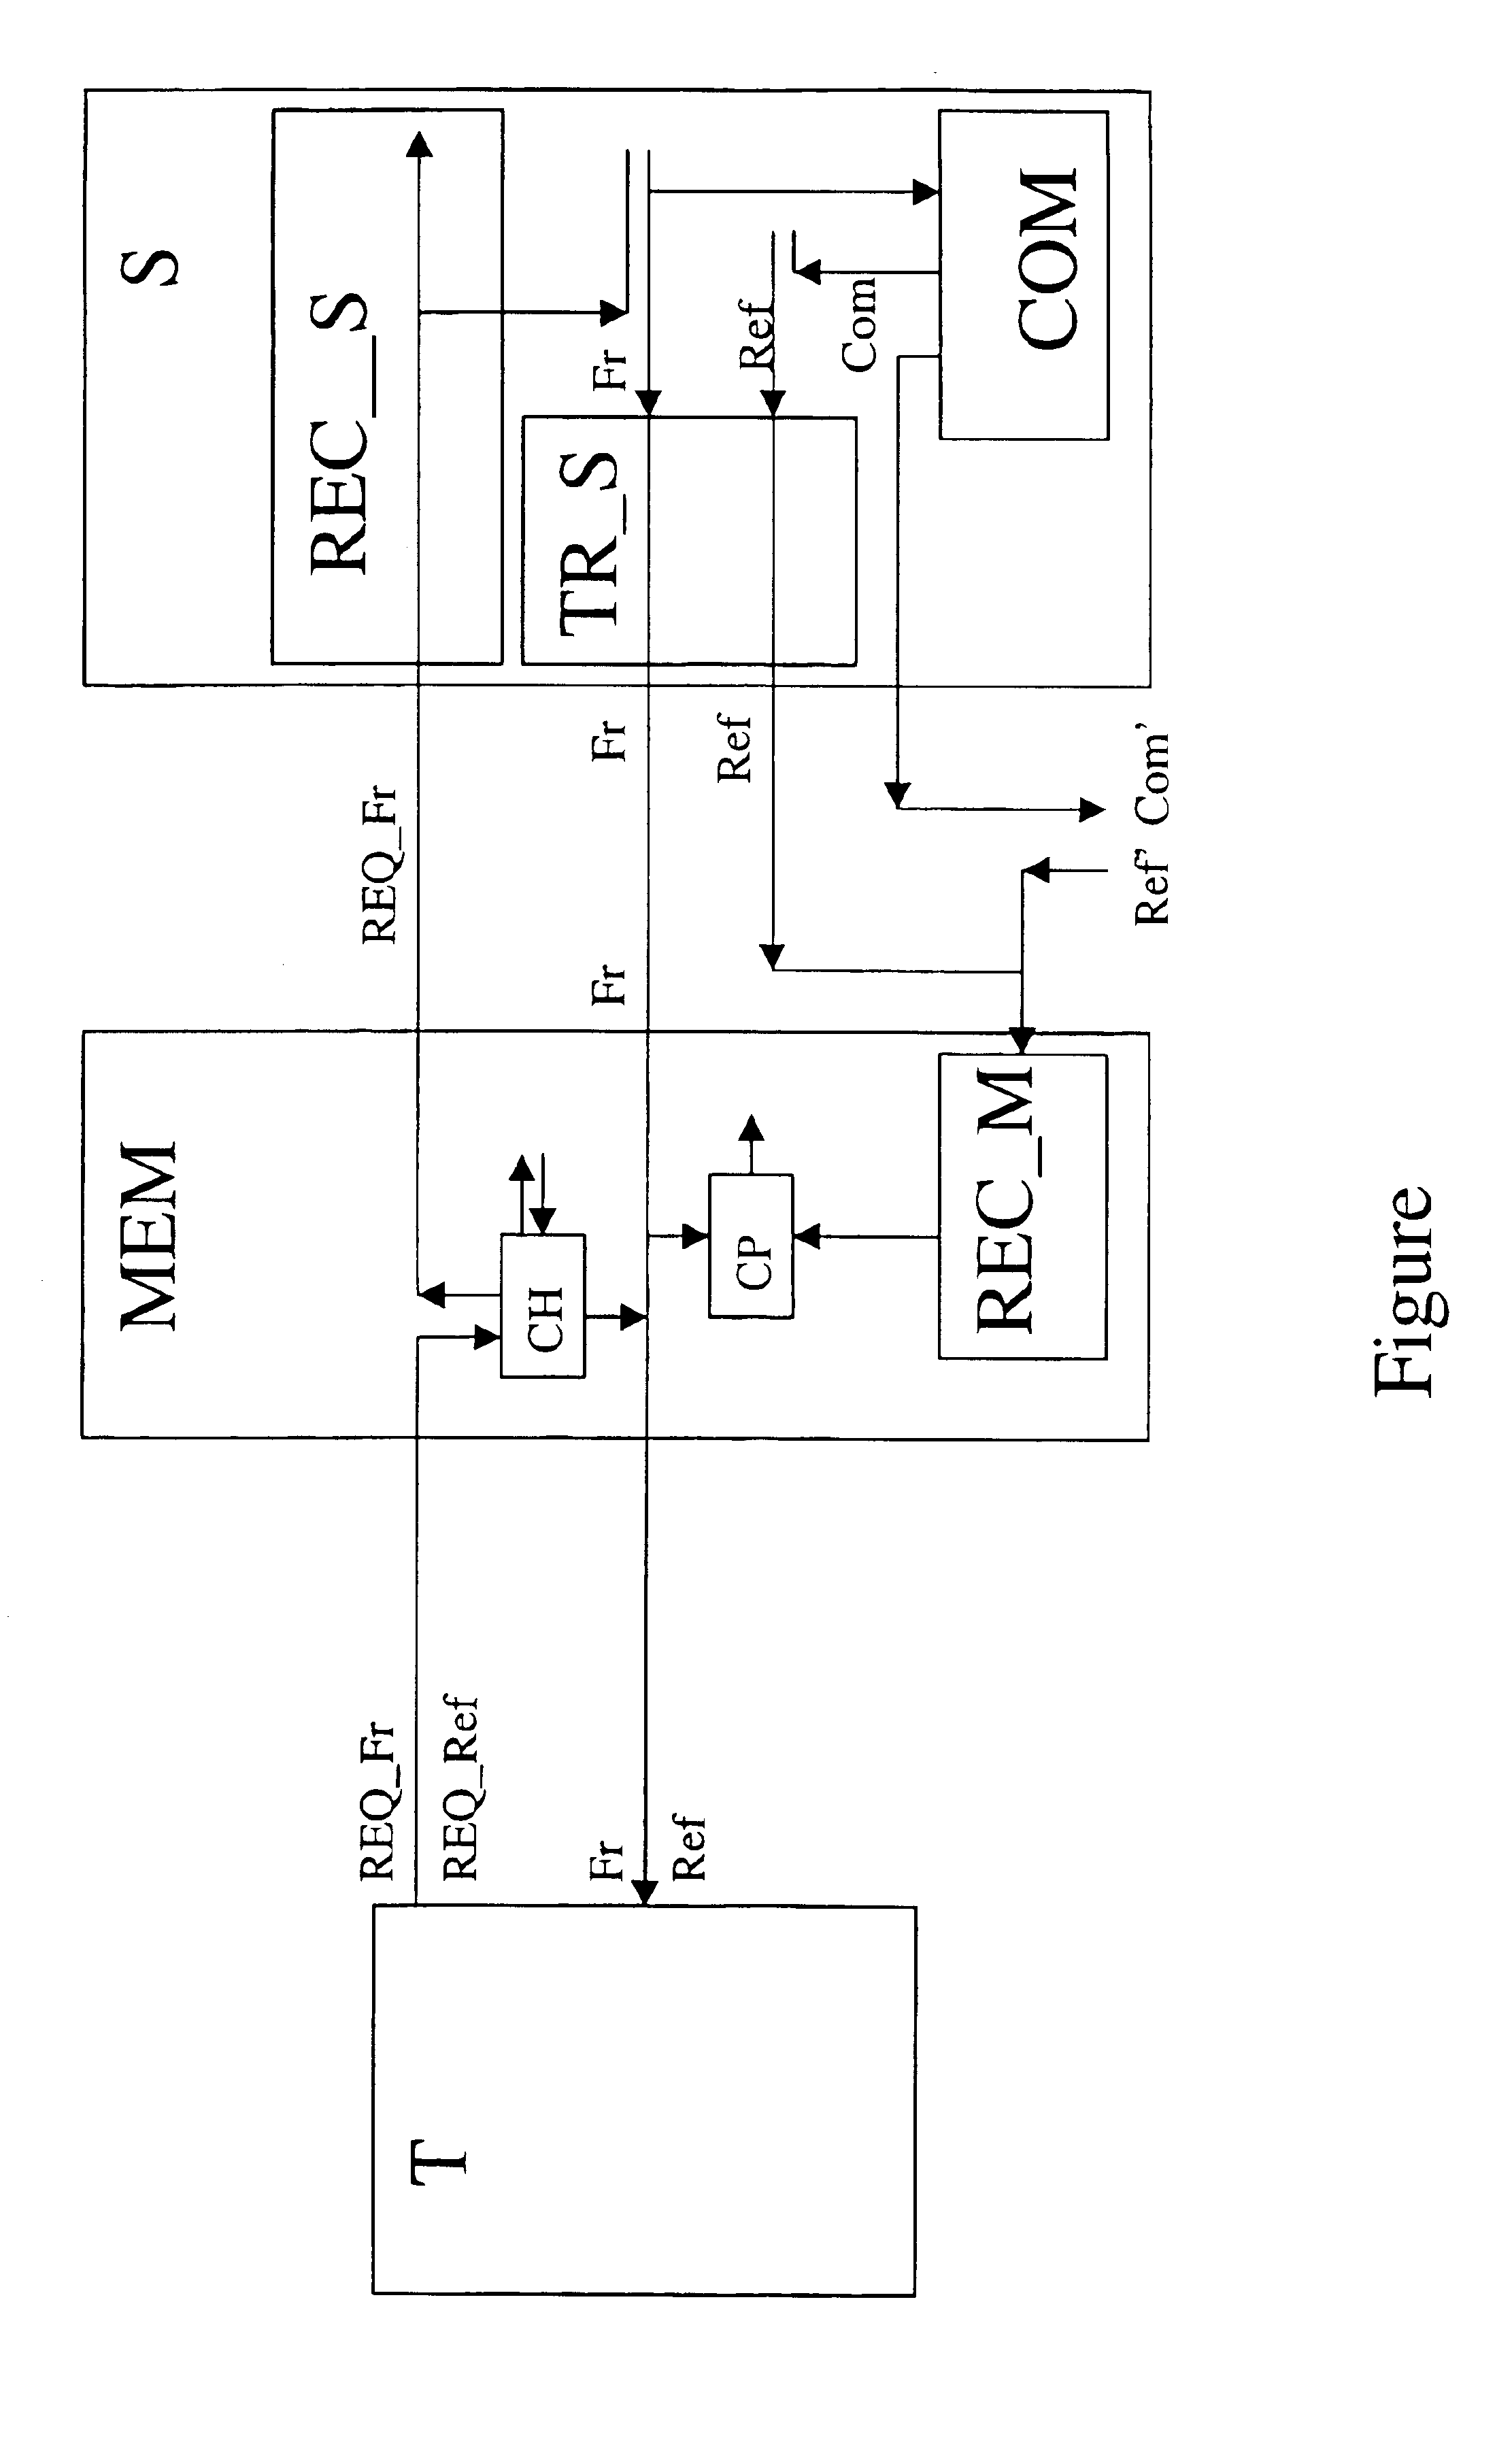 Method to provide information in an internet telecommunication network